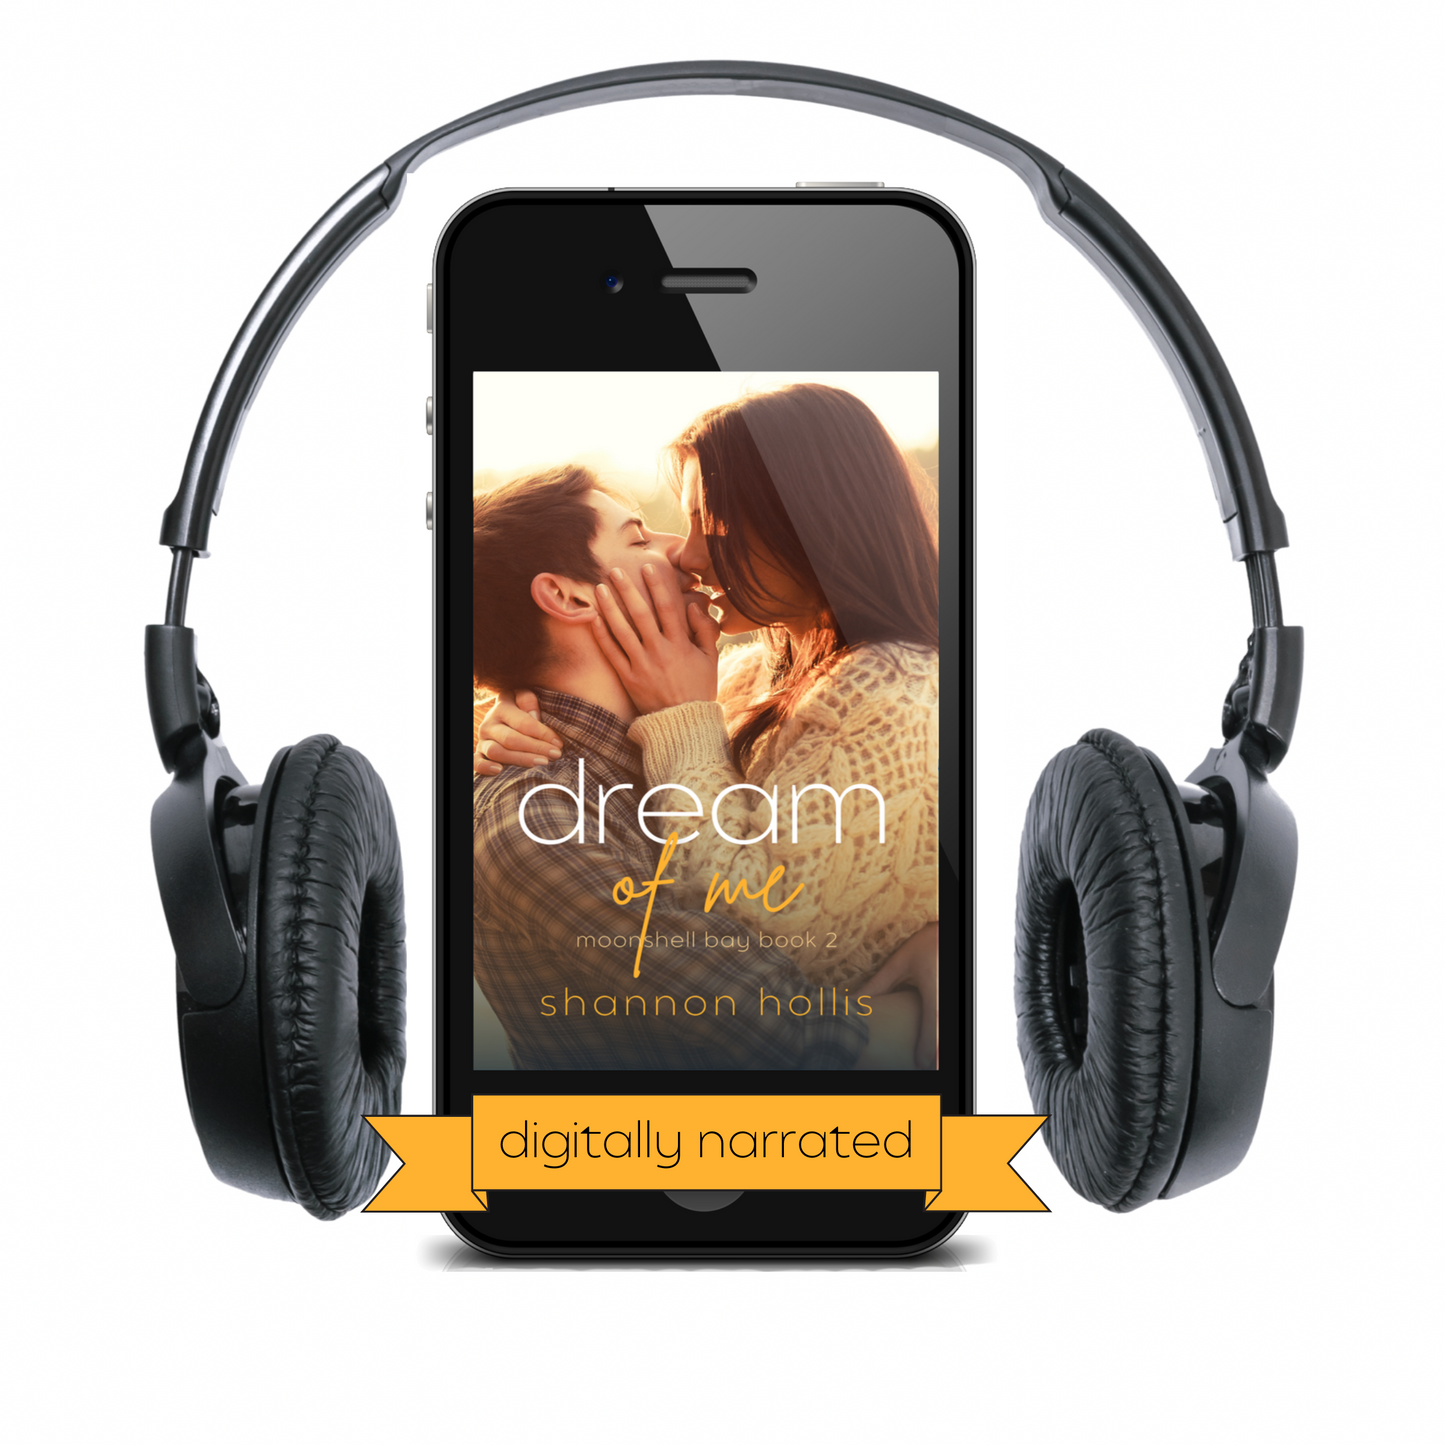 Dream of Me, a digitally narrated audiobook written by Shannon Hollis